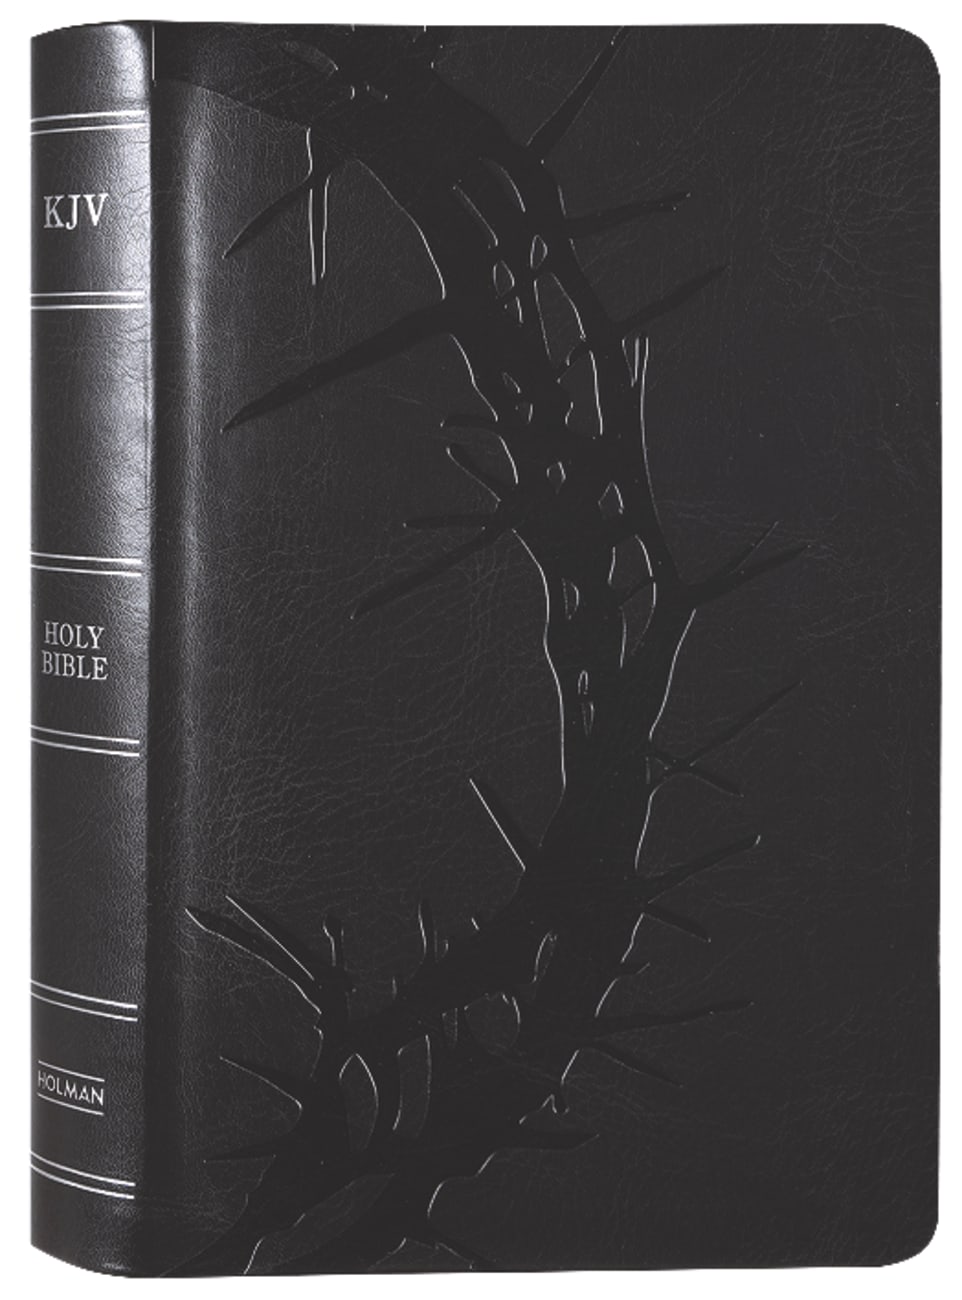 KJV Holy Bible Large Print Personal Size Reference Bible Charcoal (Red Letter Edition) Premium Imitation Leather